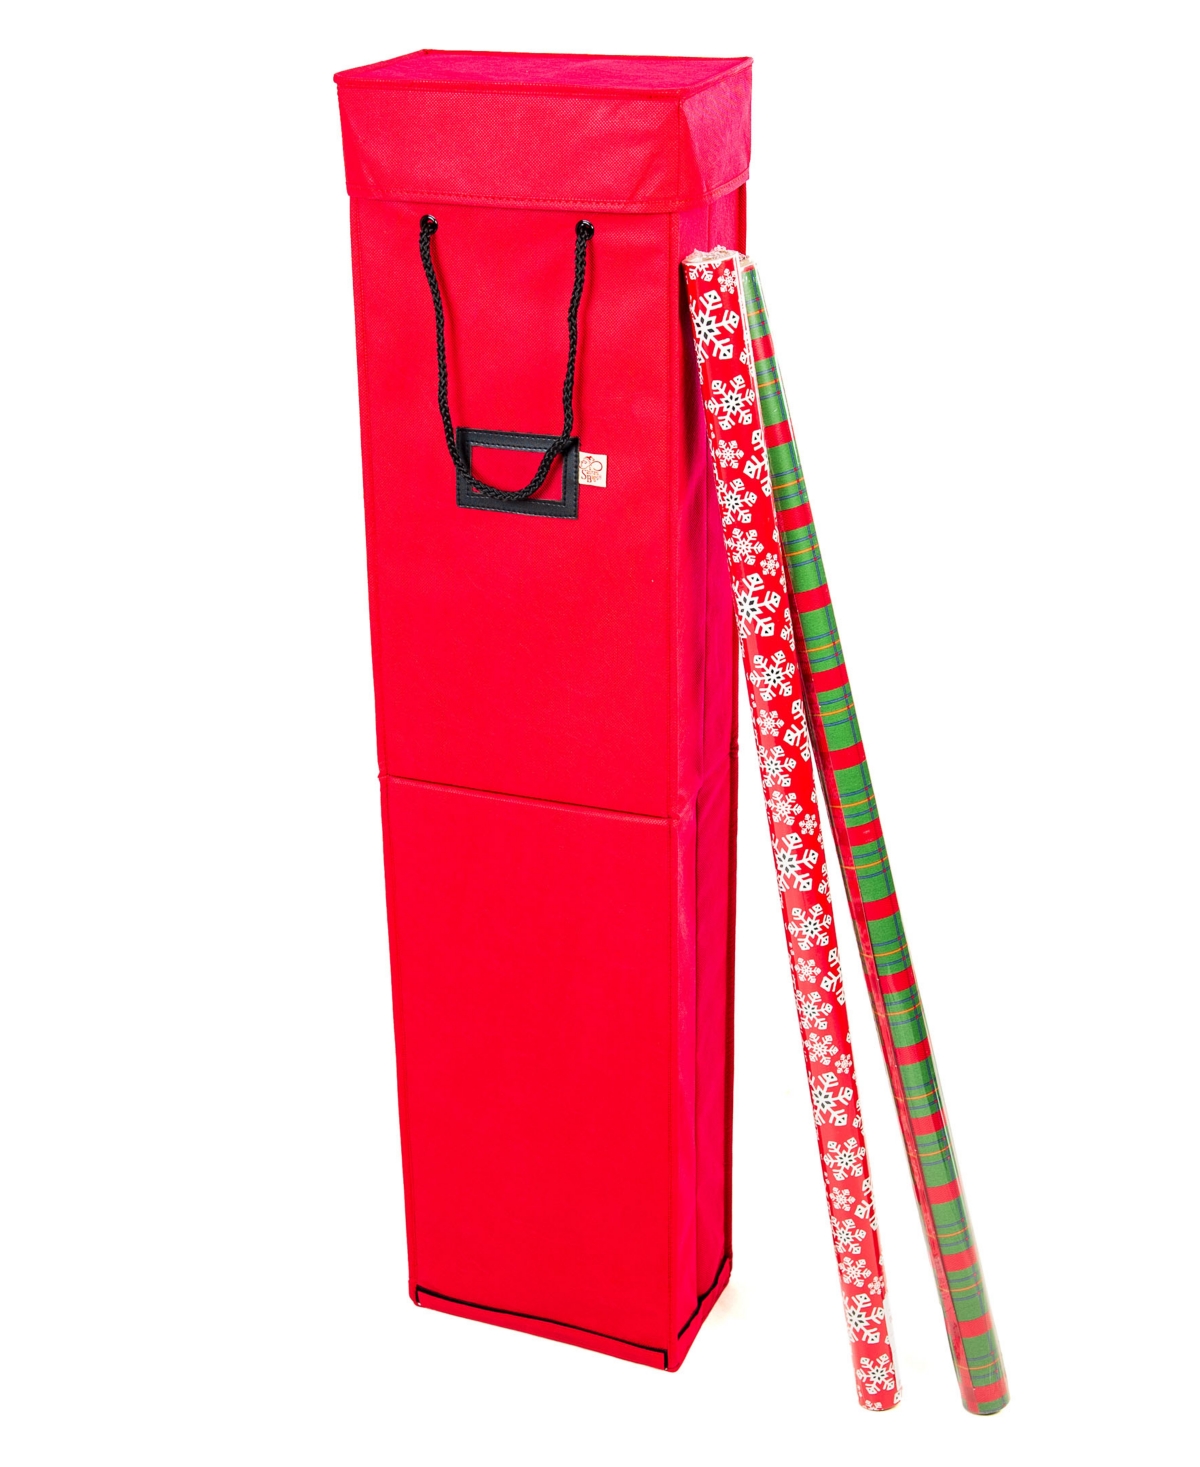 Vertical Wrapping Paper Storage Container - Red